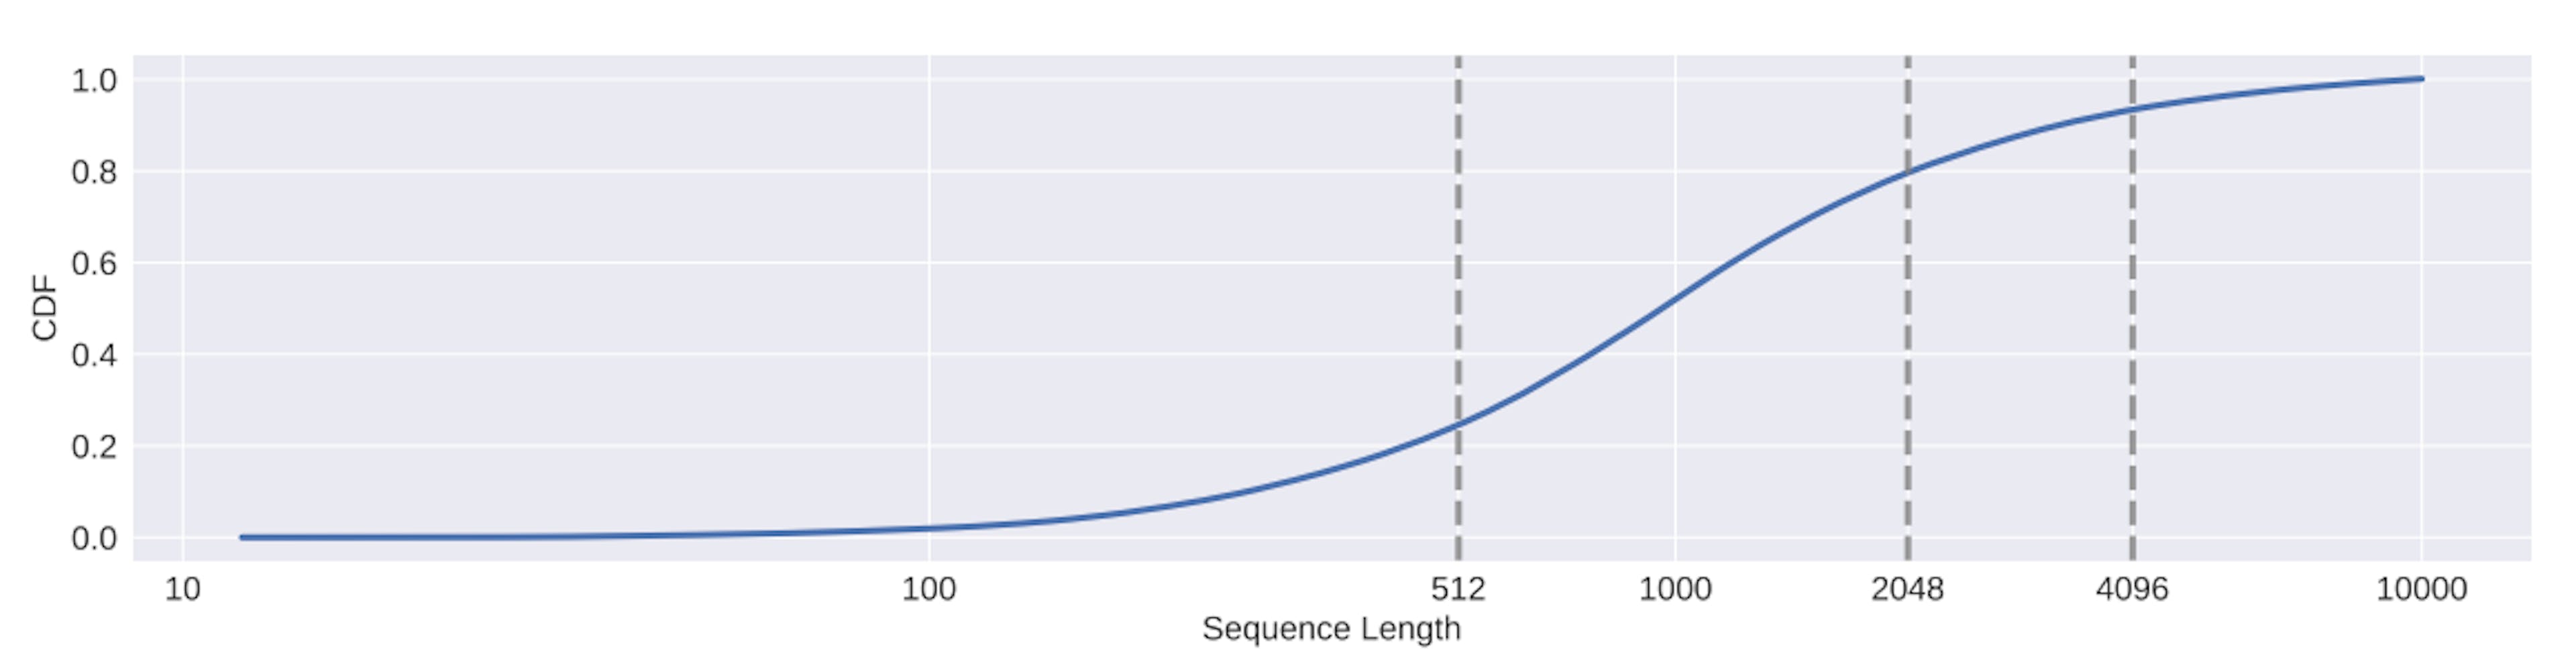 Figure 1: Cumulative distribution function of document lengths in the MS MARCO document corpus, showing the proportion of documents that has a length less than a specific value (determined by the LLaMA tokenizer). For clarity, we exclude 3% of documents with a length exceeding 10,000 tokens.